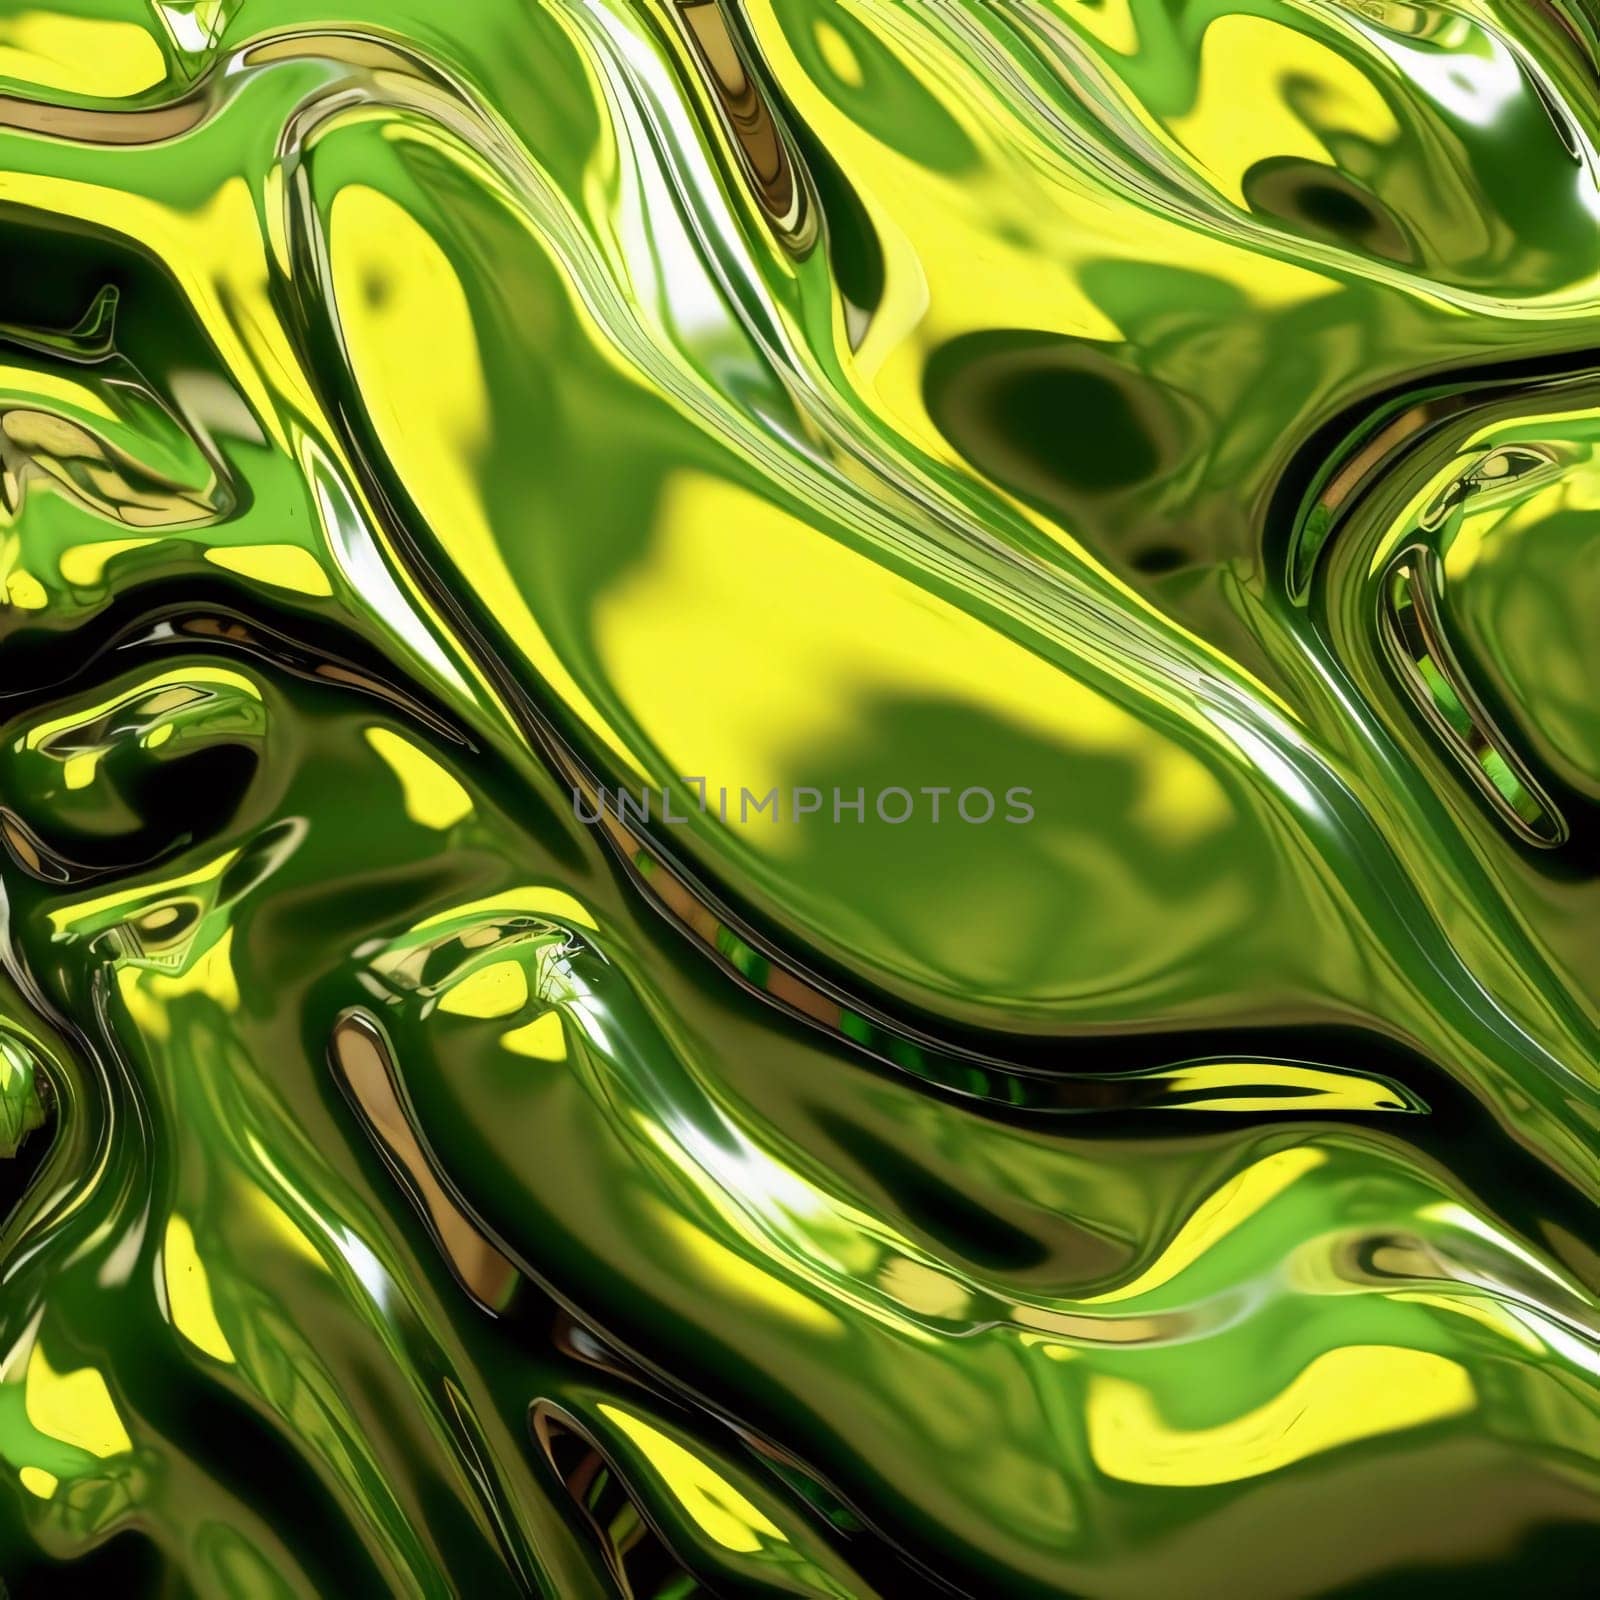 Abstract background design: abstract background with smooth lines in green and yellow colors, digitally generated image